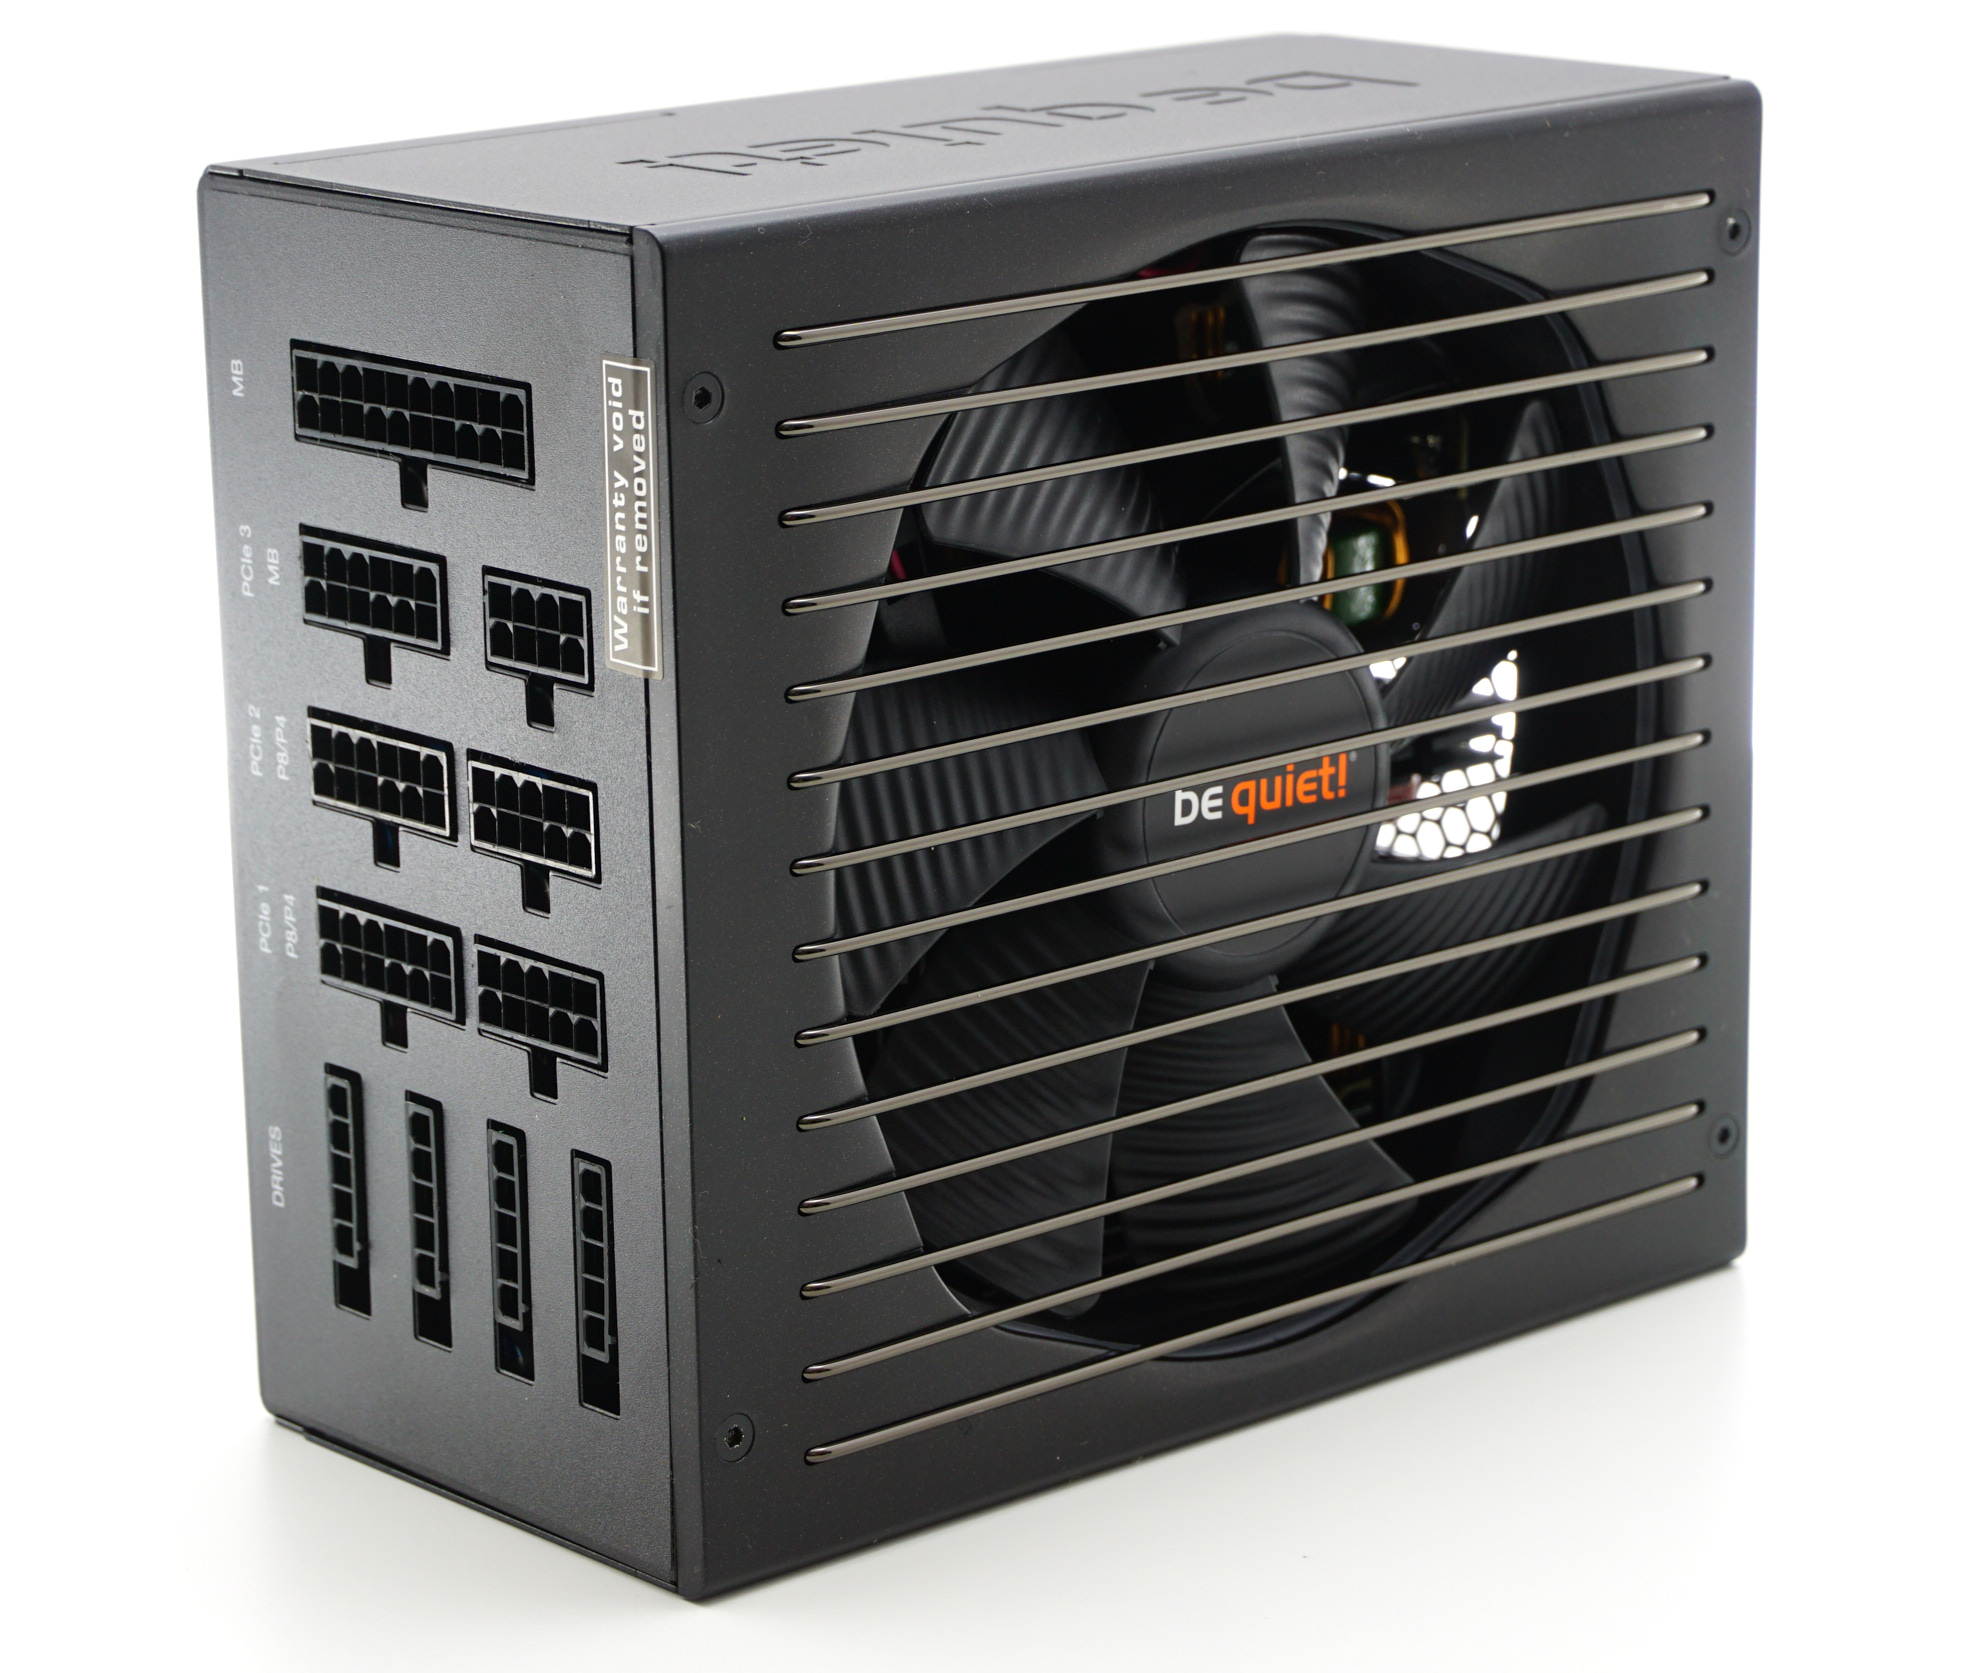 Final Words & Conclusion - The Be Quiet! Straight Power 11 750W PSU Review:  Excellent Quality, But Not Quiet